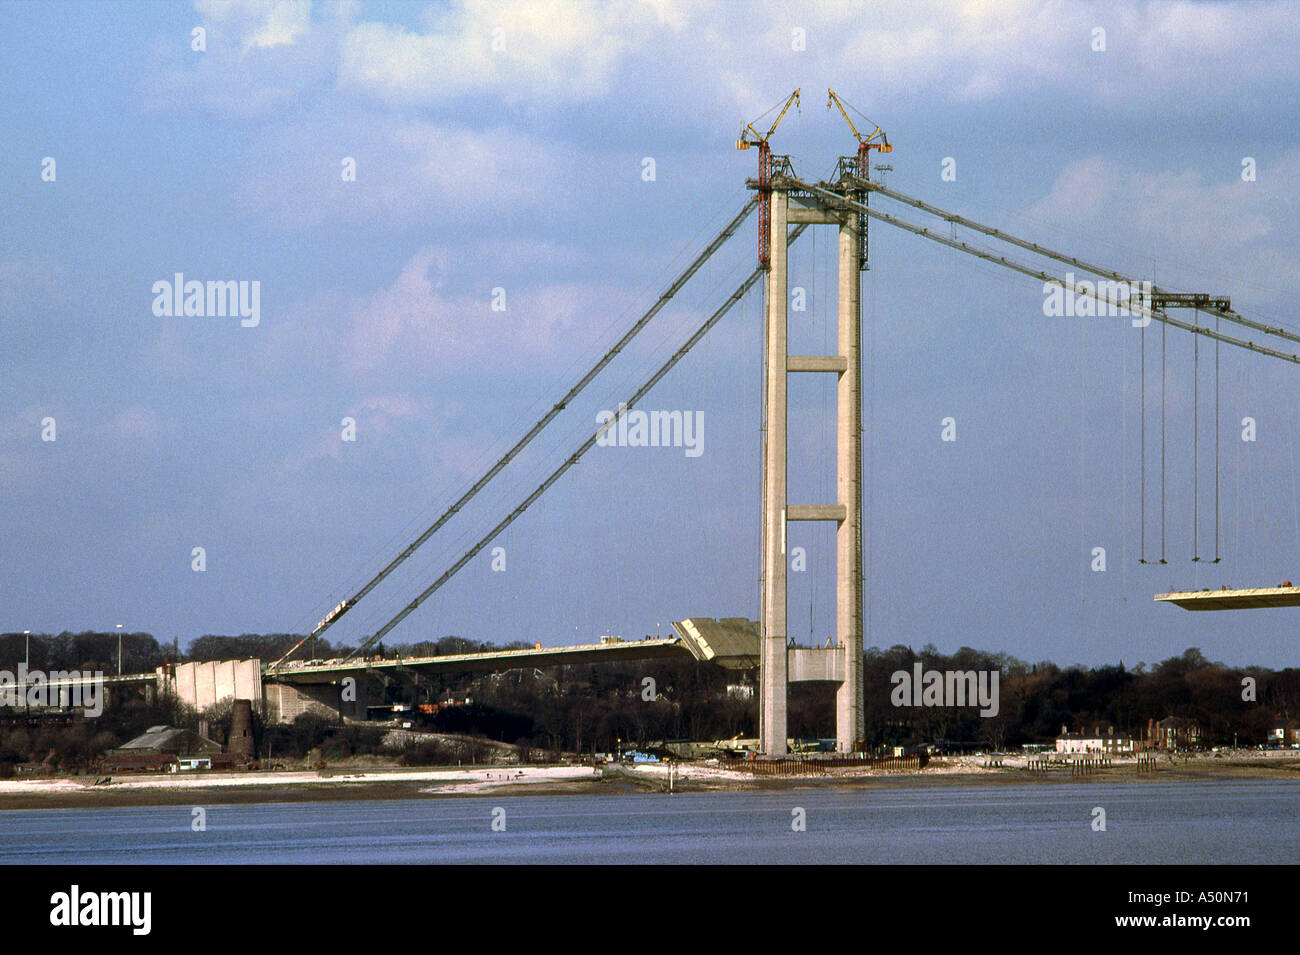 Incident during the building of the Humber Bridge when one road section tilted and almost fell into the river Stock Photo